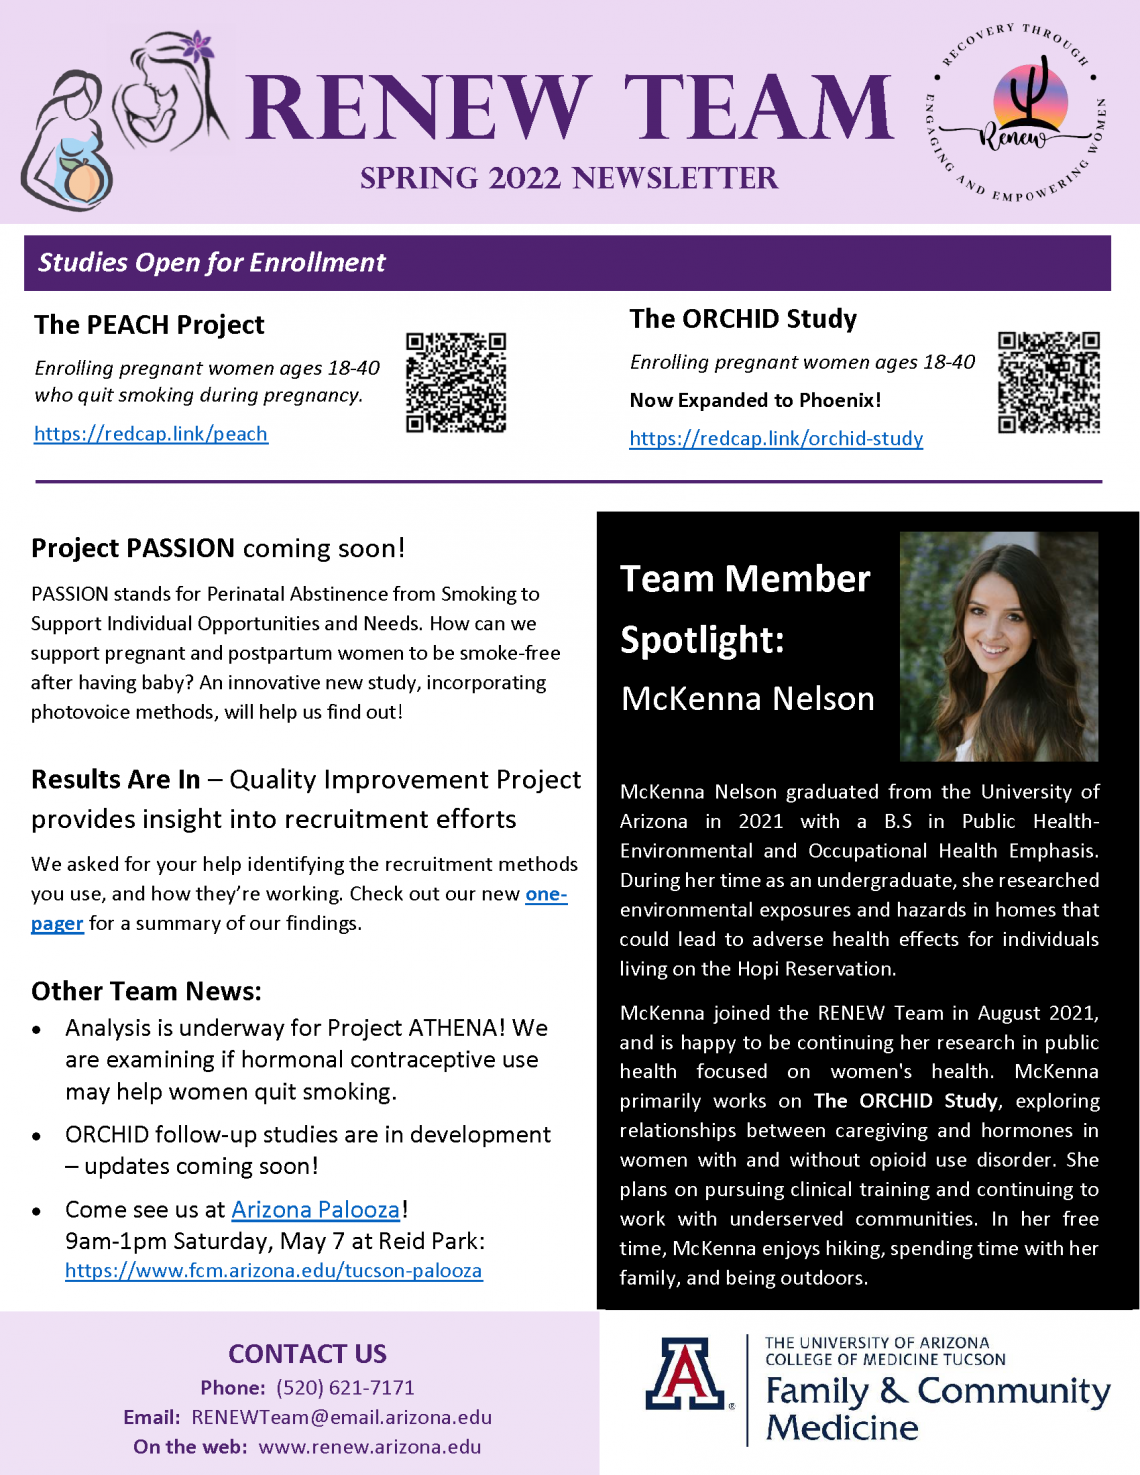 Spring Newsletter Page 1